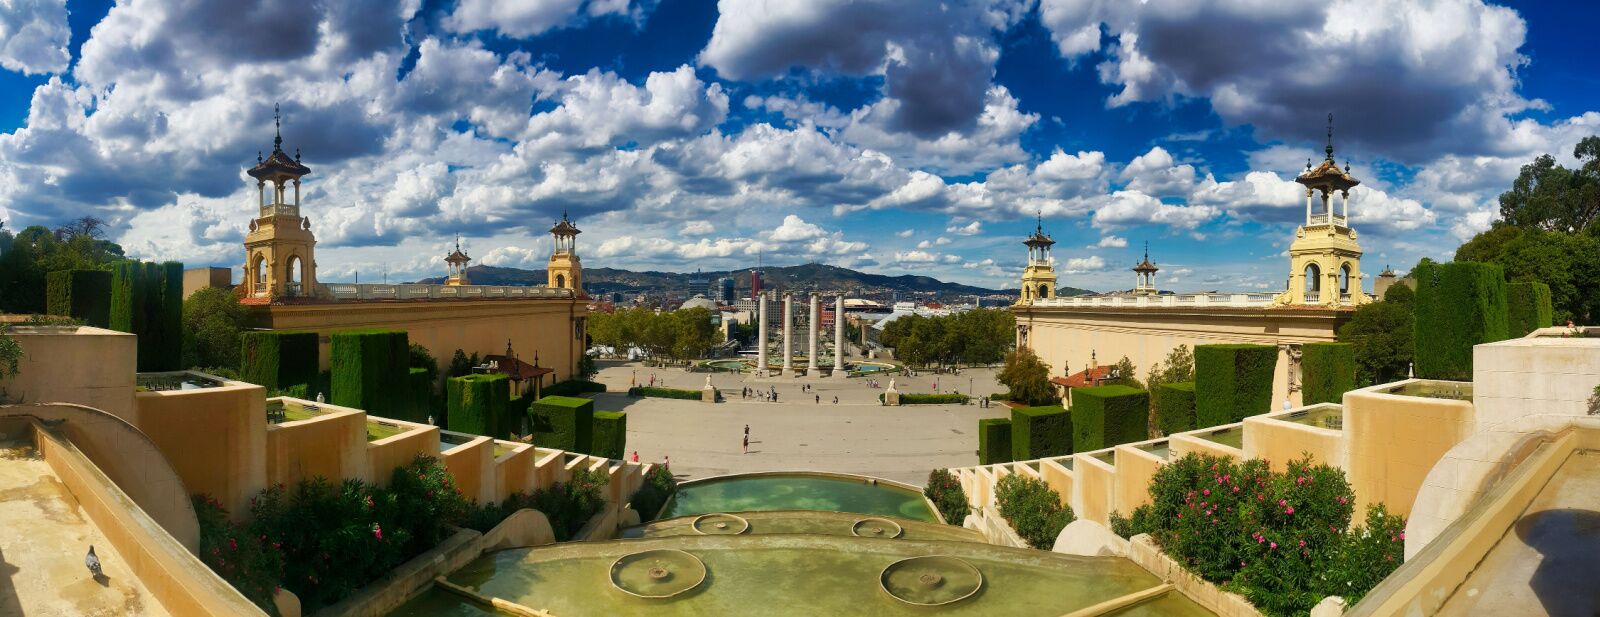 pano view of one of the biggest parks in barcelona with a castle and big botanical garden